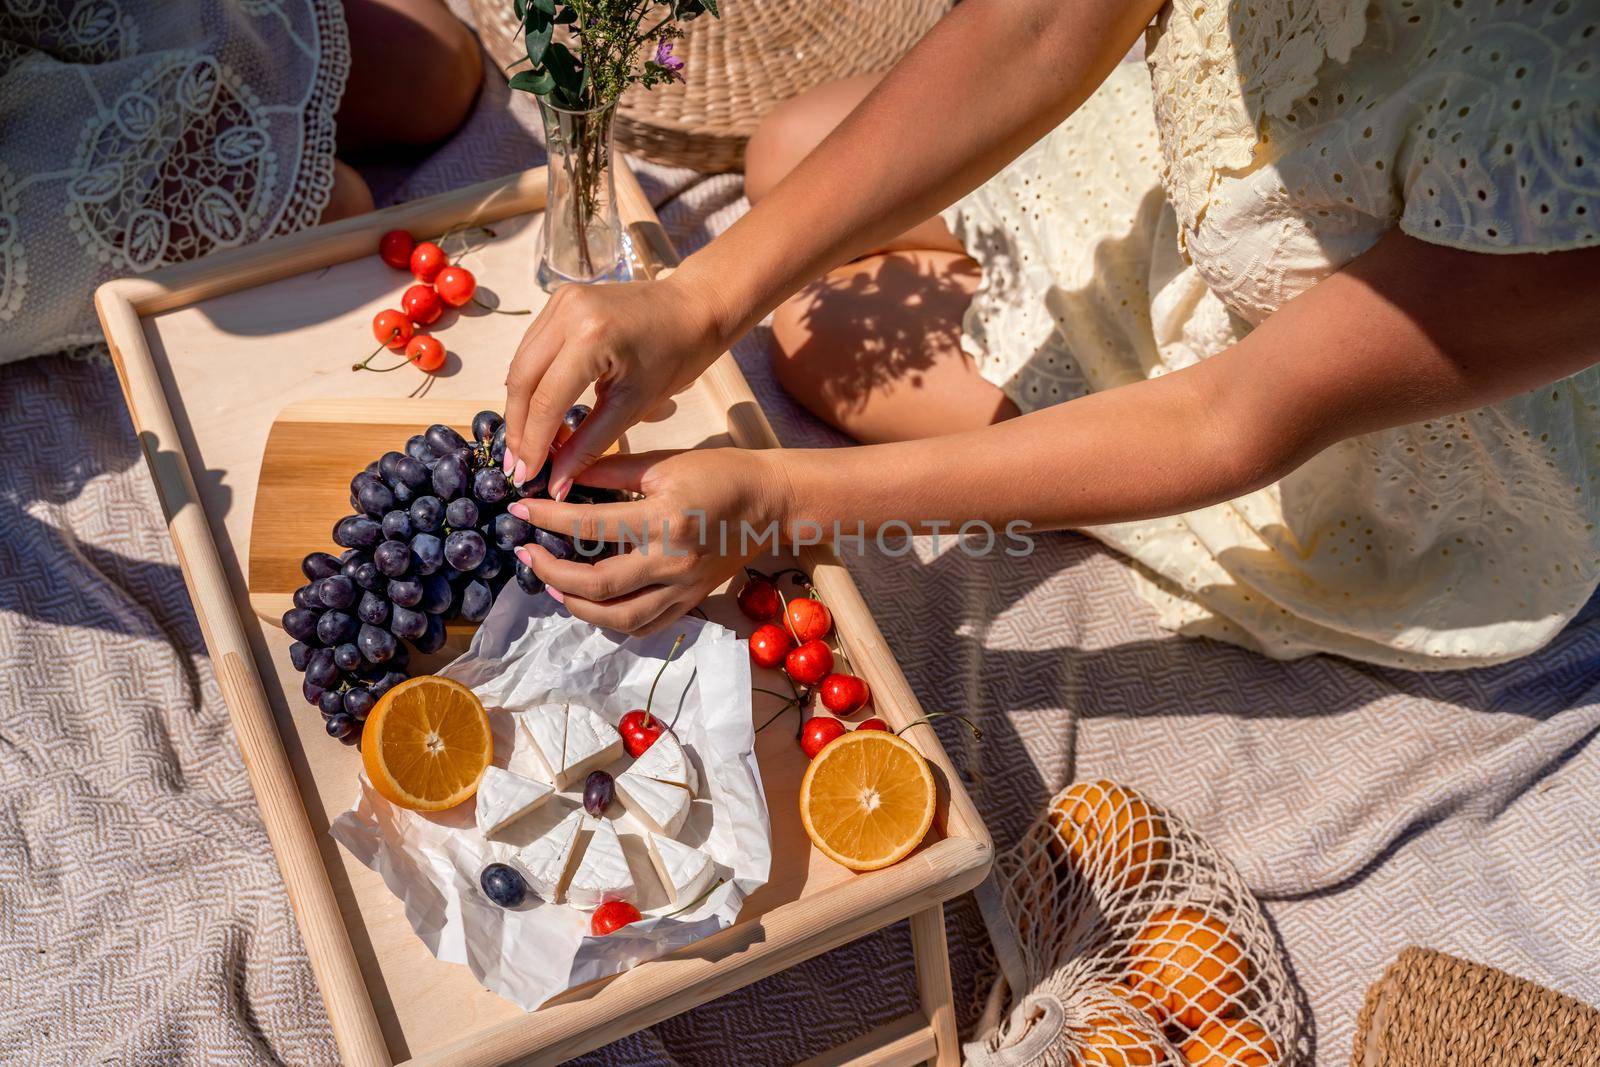 Romantic picnic for two with fruit, bread and cheese. Oranges, cherries, black grapes and camembert on a wooden table. The girl's hands with a manicure tear off a grape berry sitting on a light blanket. by Matiunina